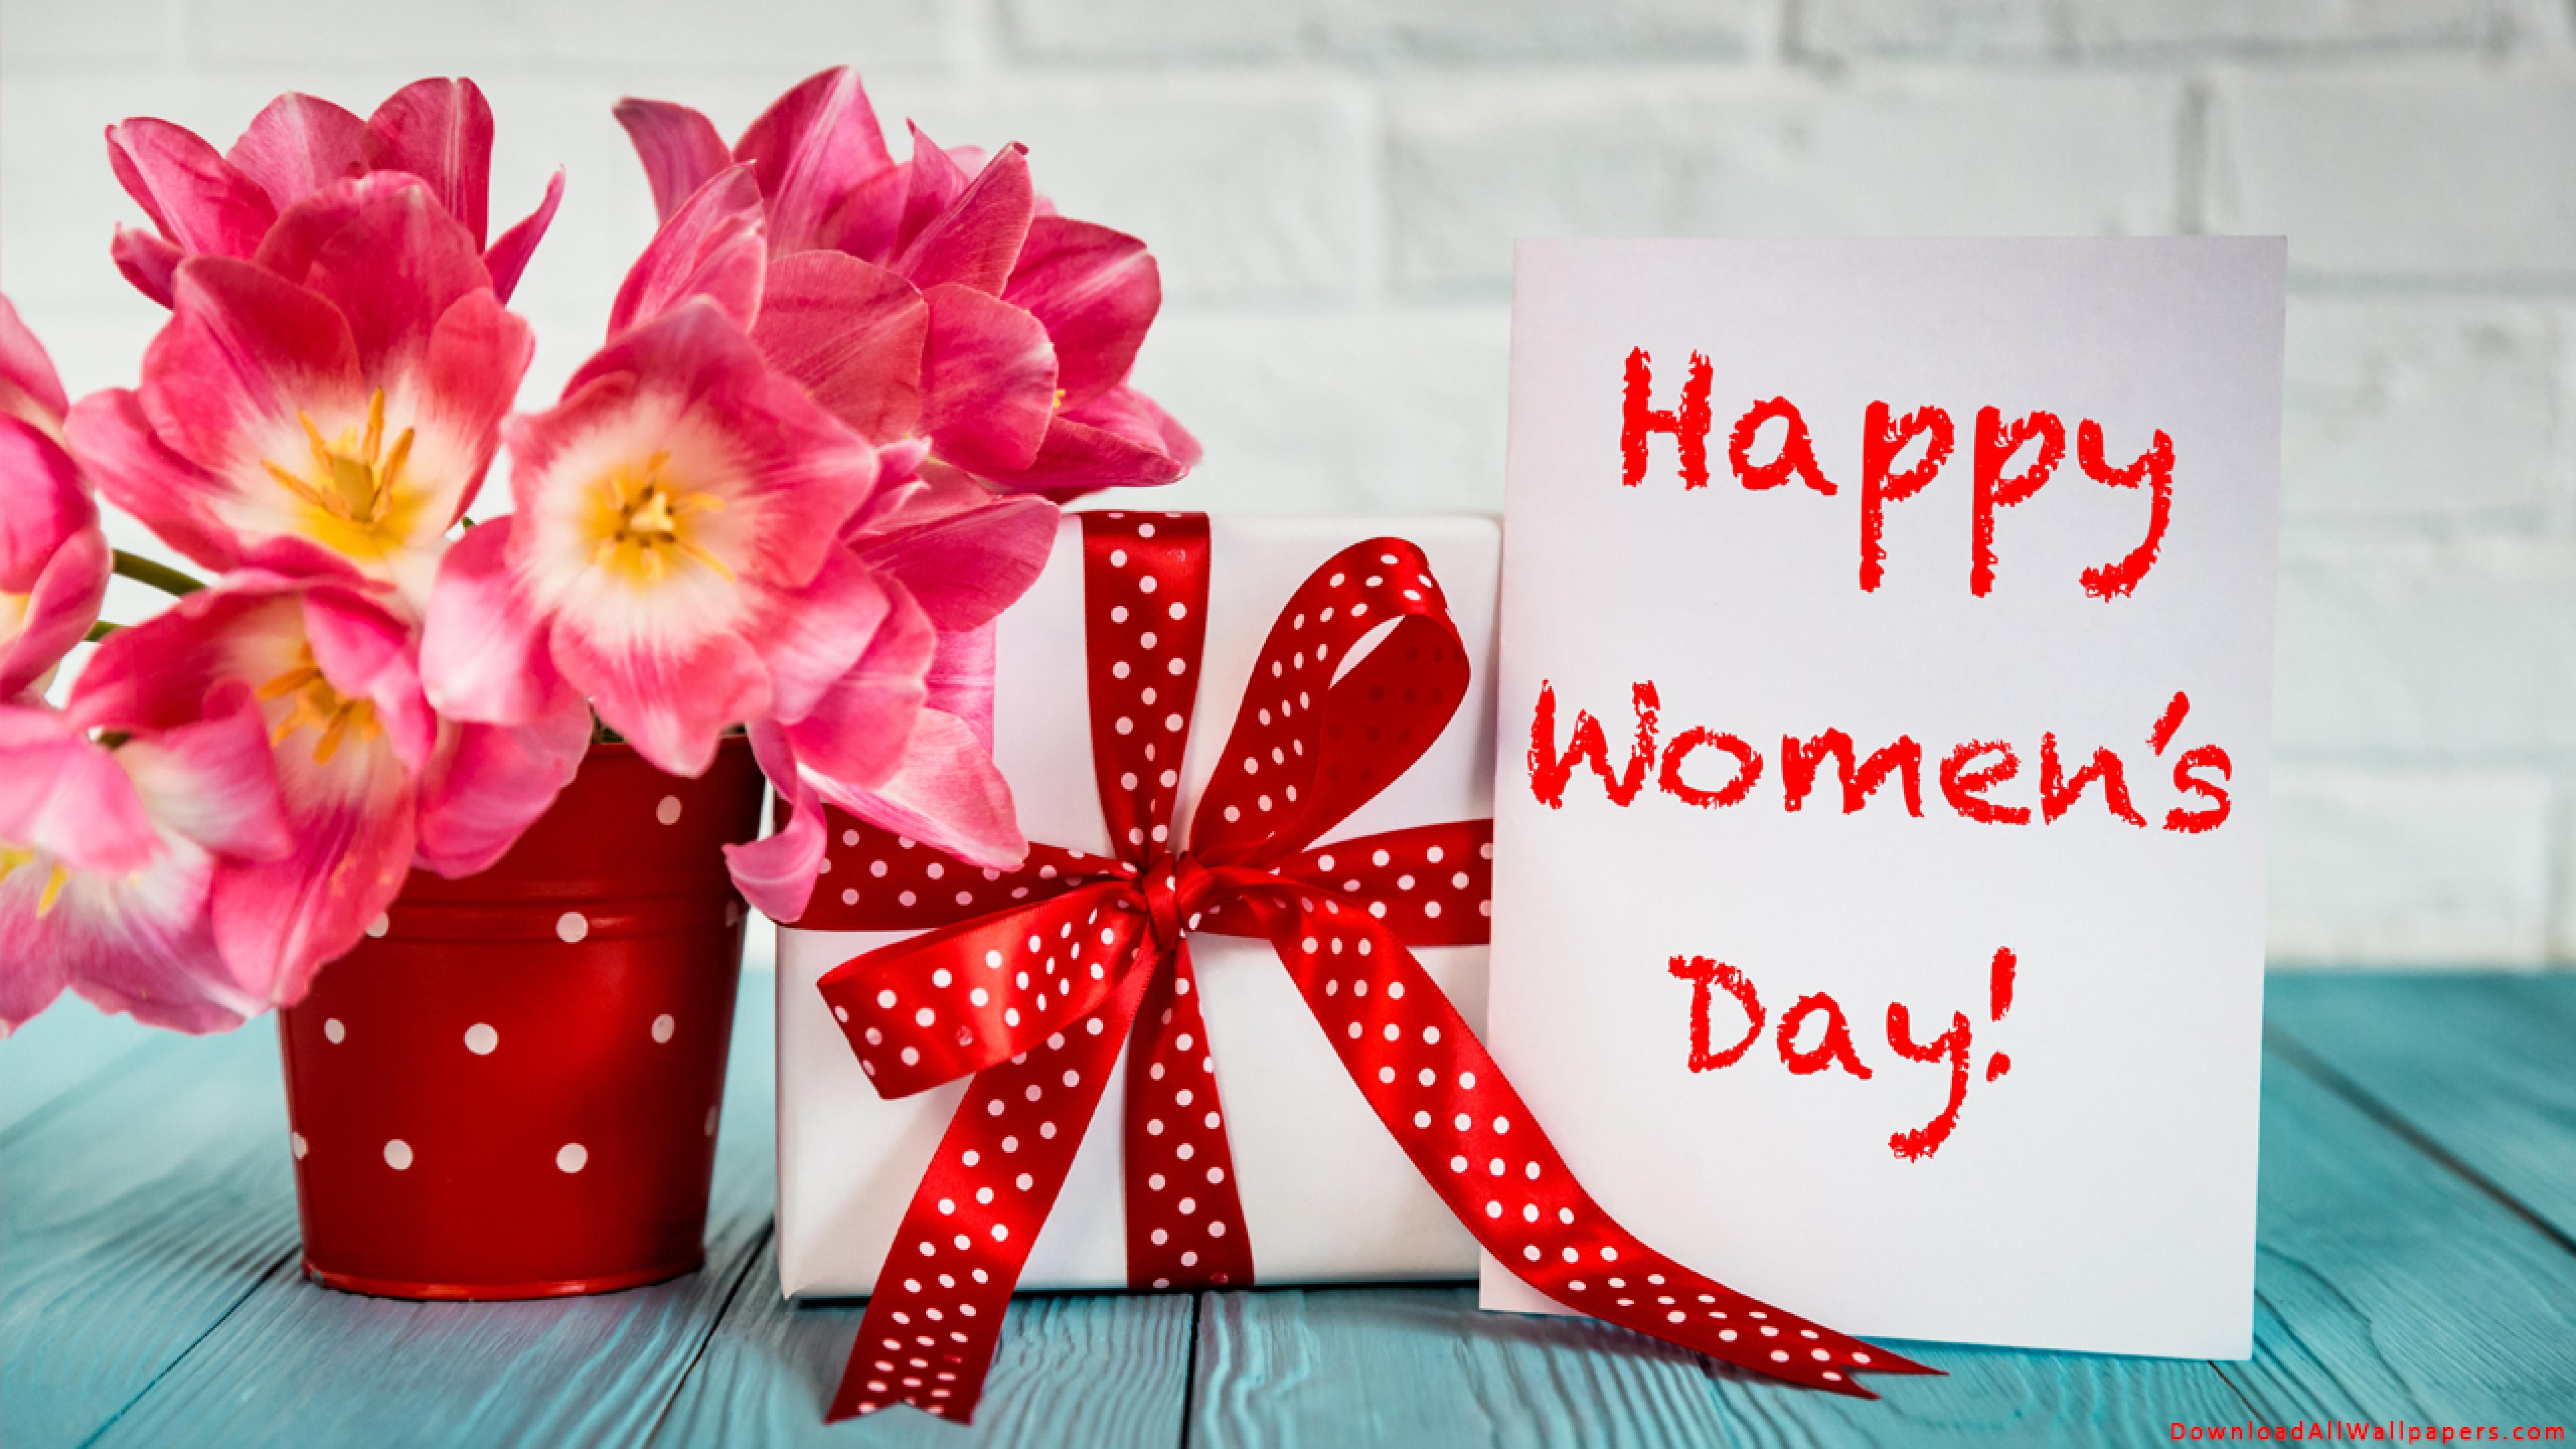 Happy Women's Day Wish With Flower And Gift, Happy Women's Day